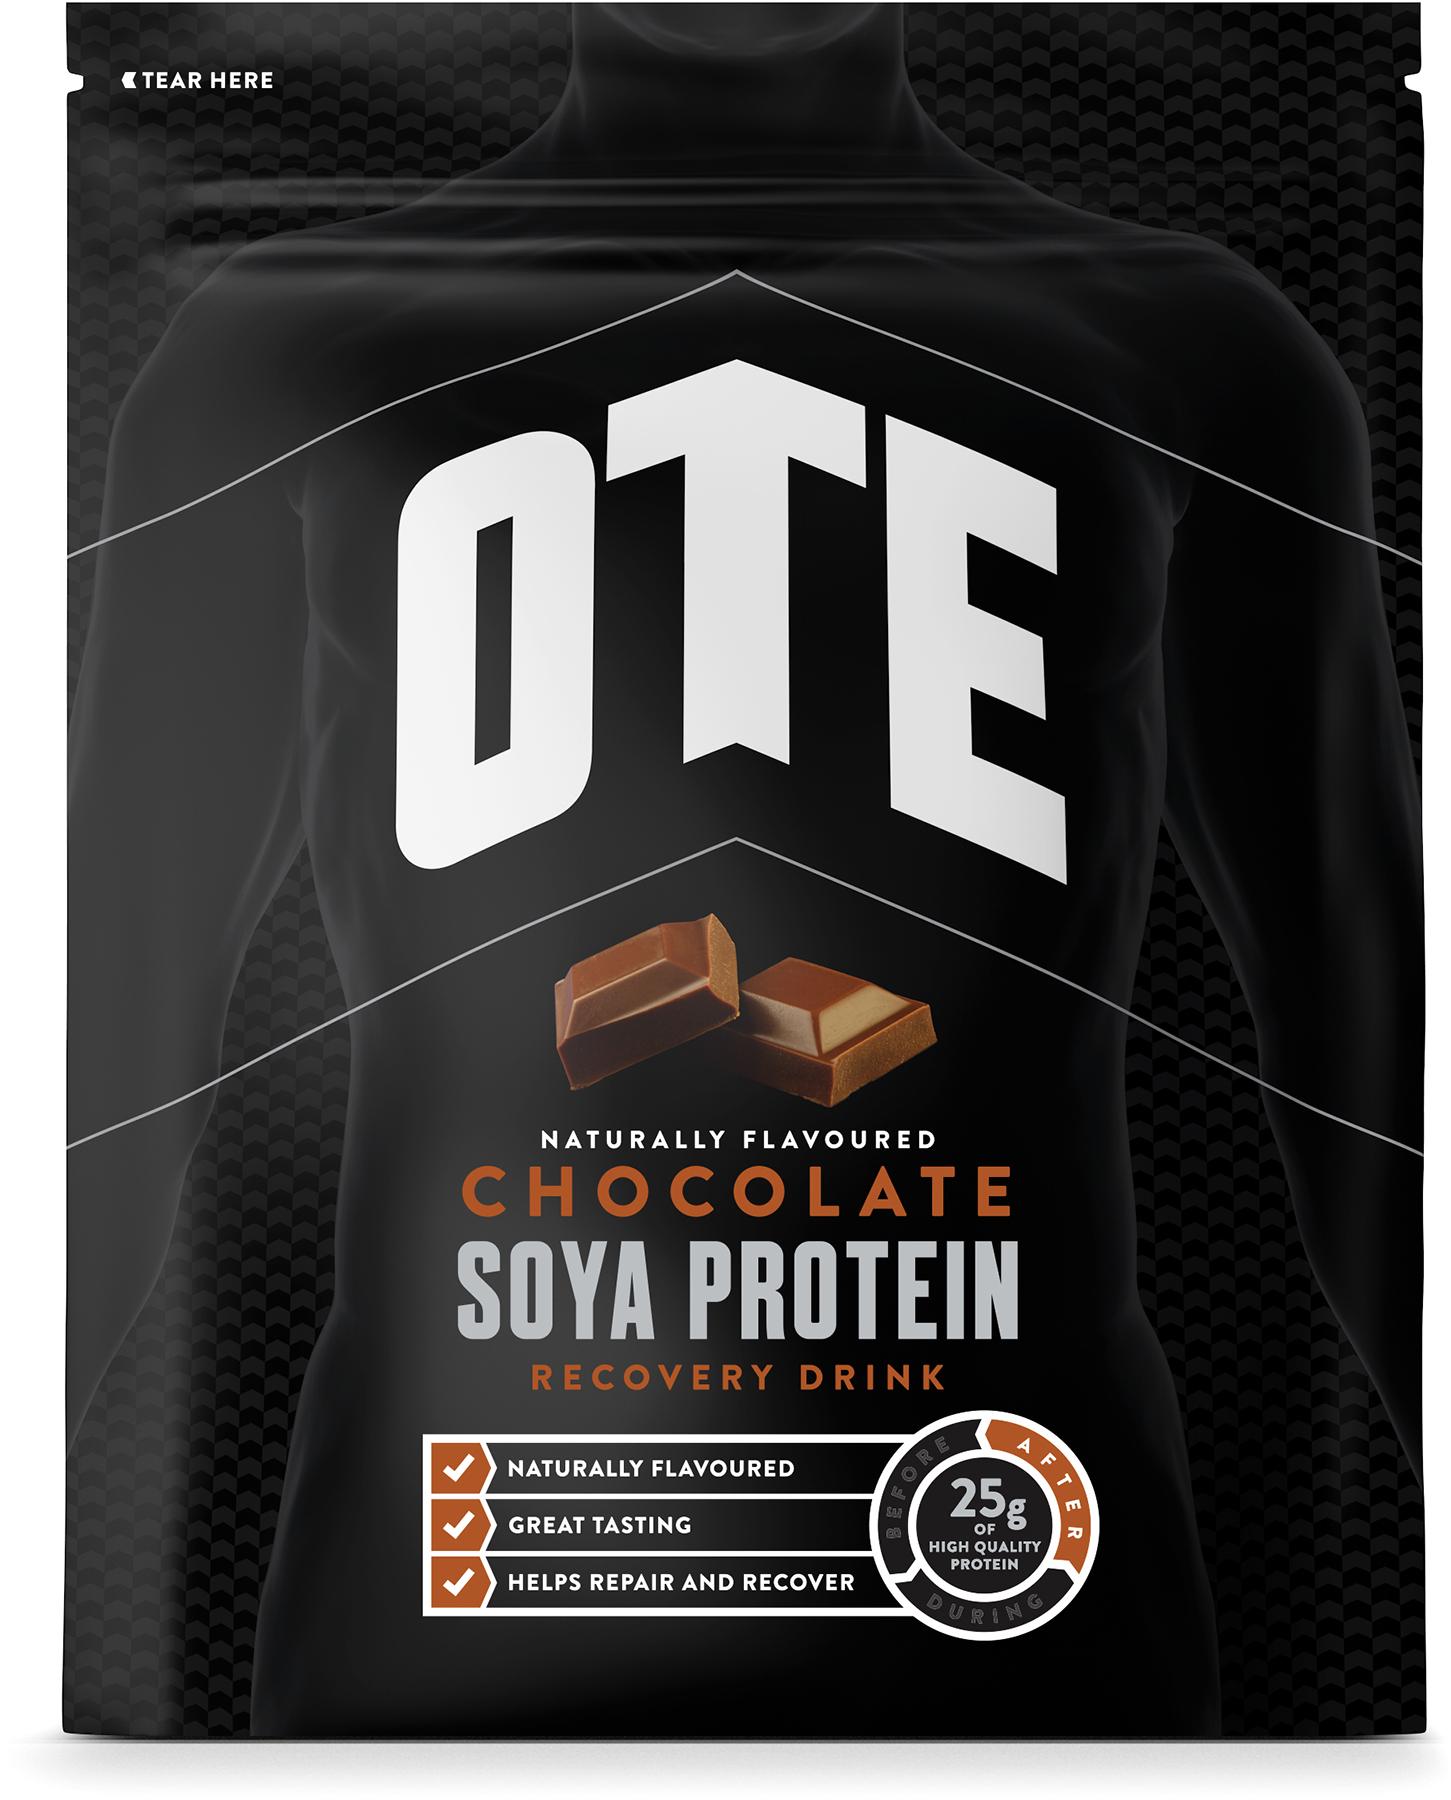 Ote Soya Protein Recovery Drink (1kg)